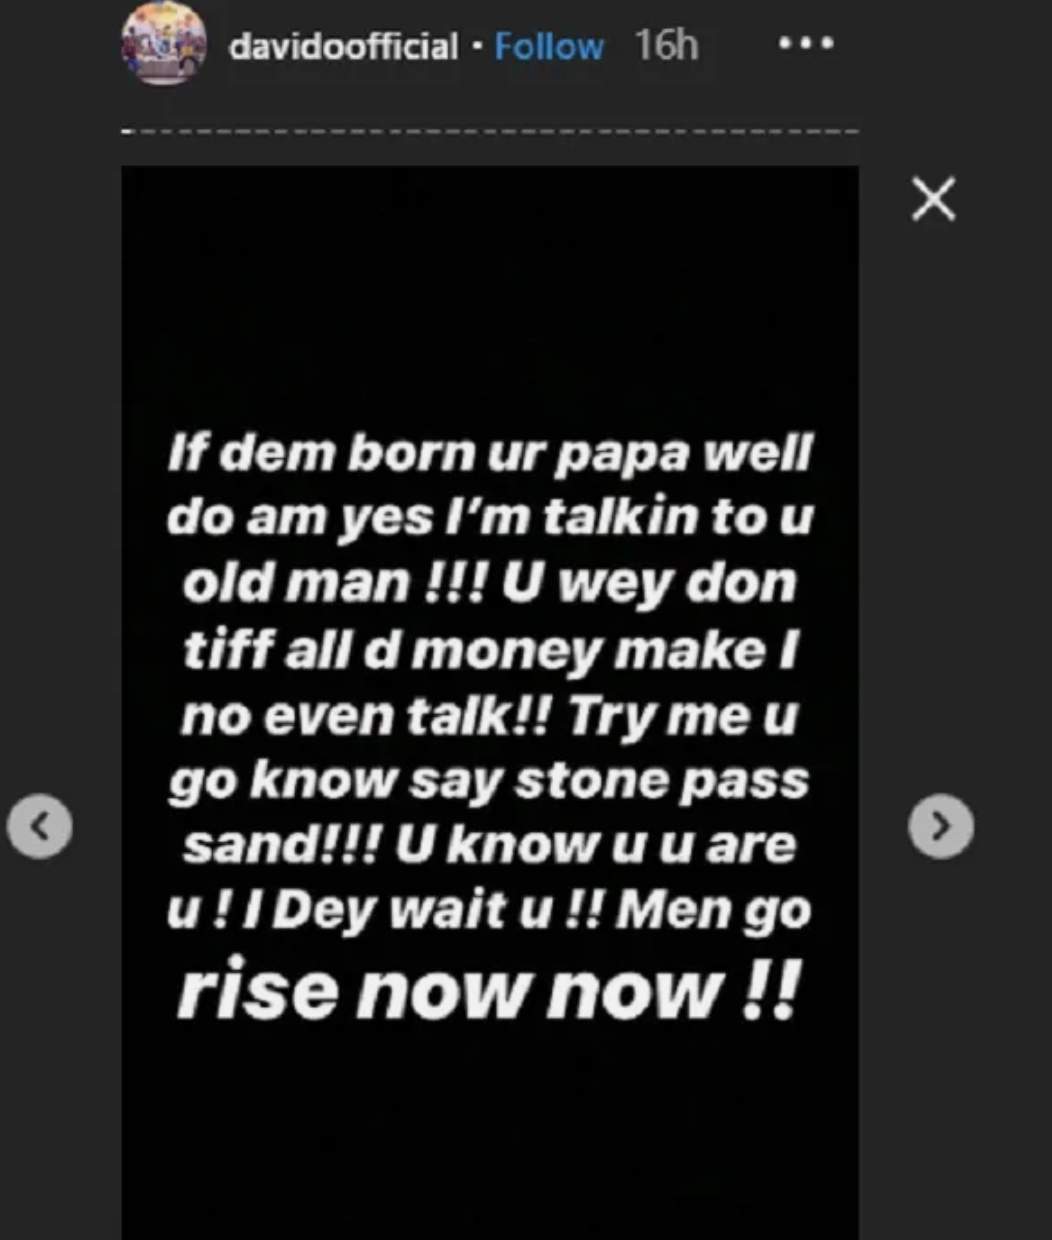 'Try me and you know say stone pass sand' - Davido threatens man